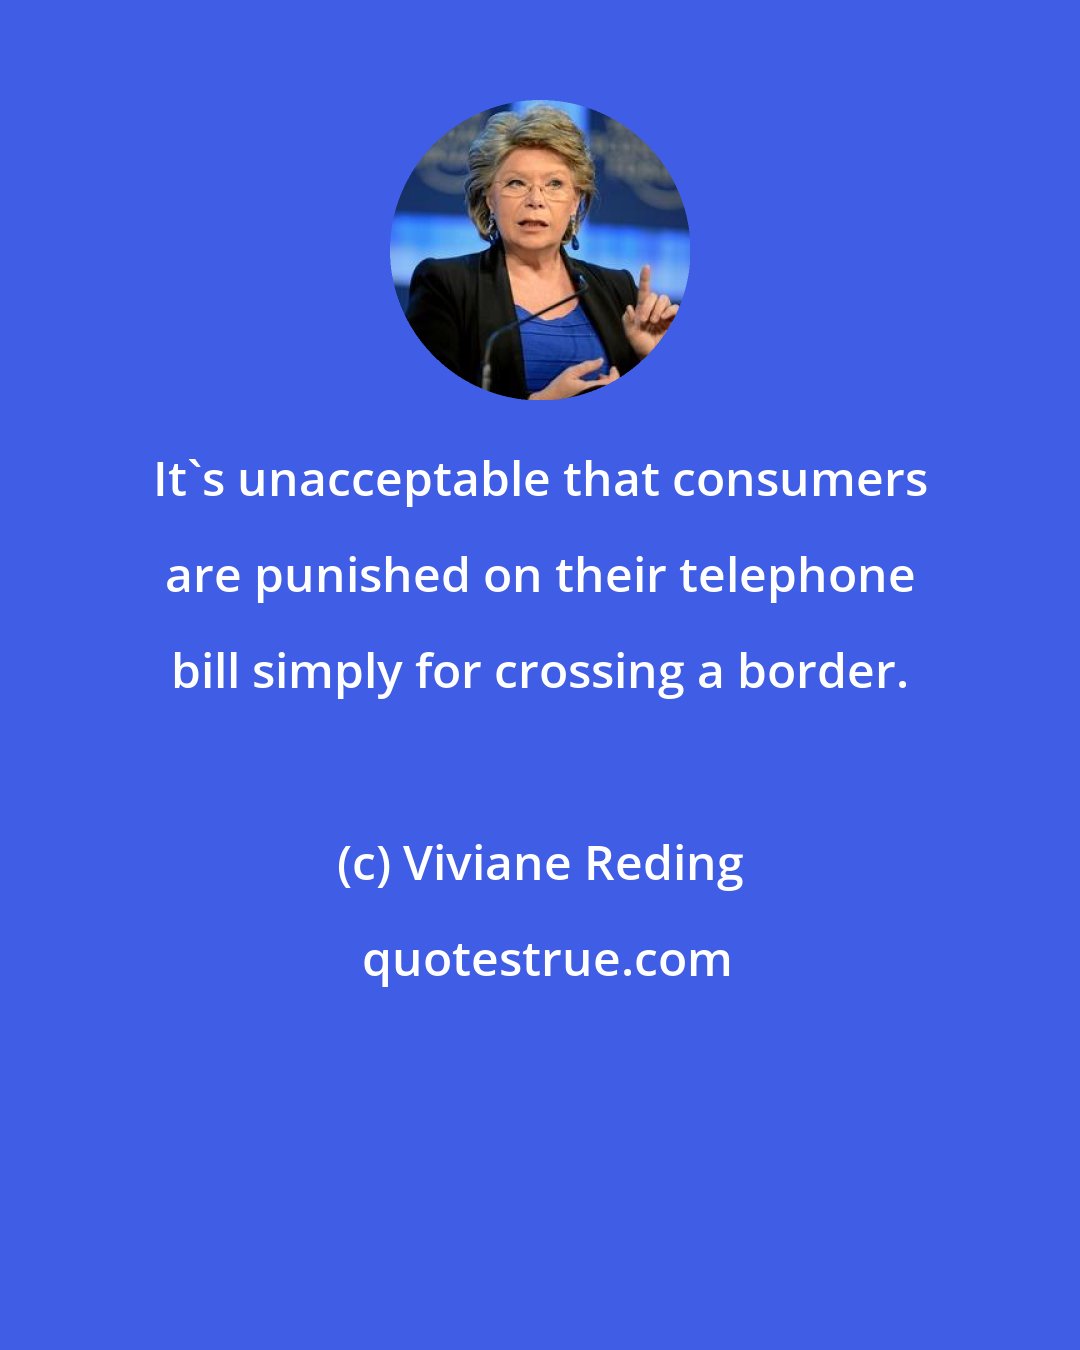 Viviane Reding: It's unacceptable that consumers are punished on their telephone bill simply for crossing a border.